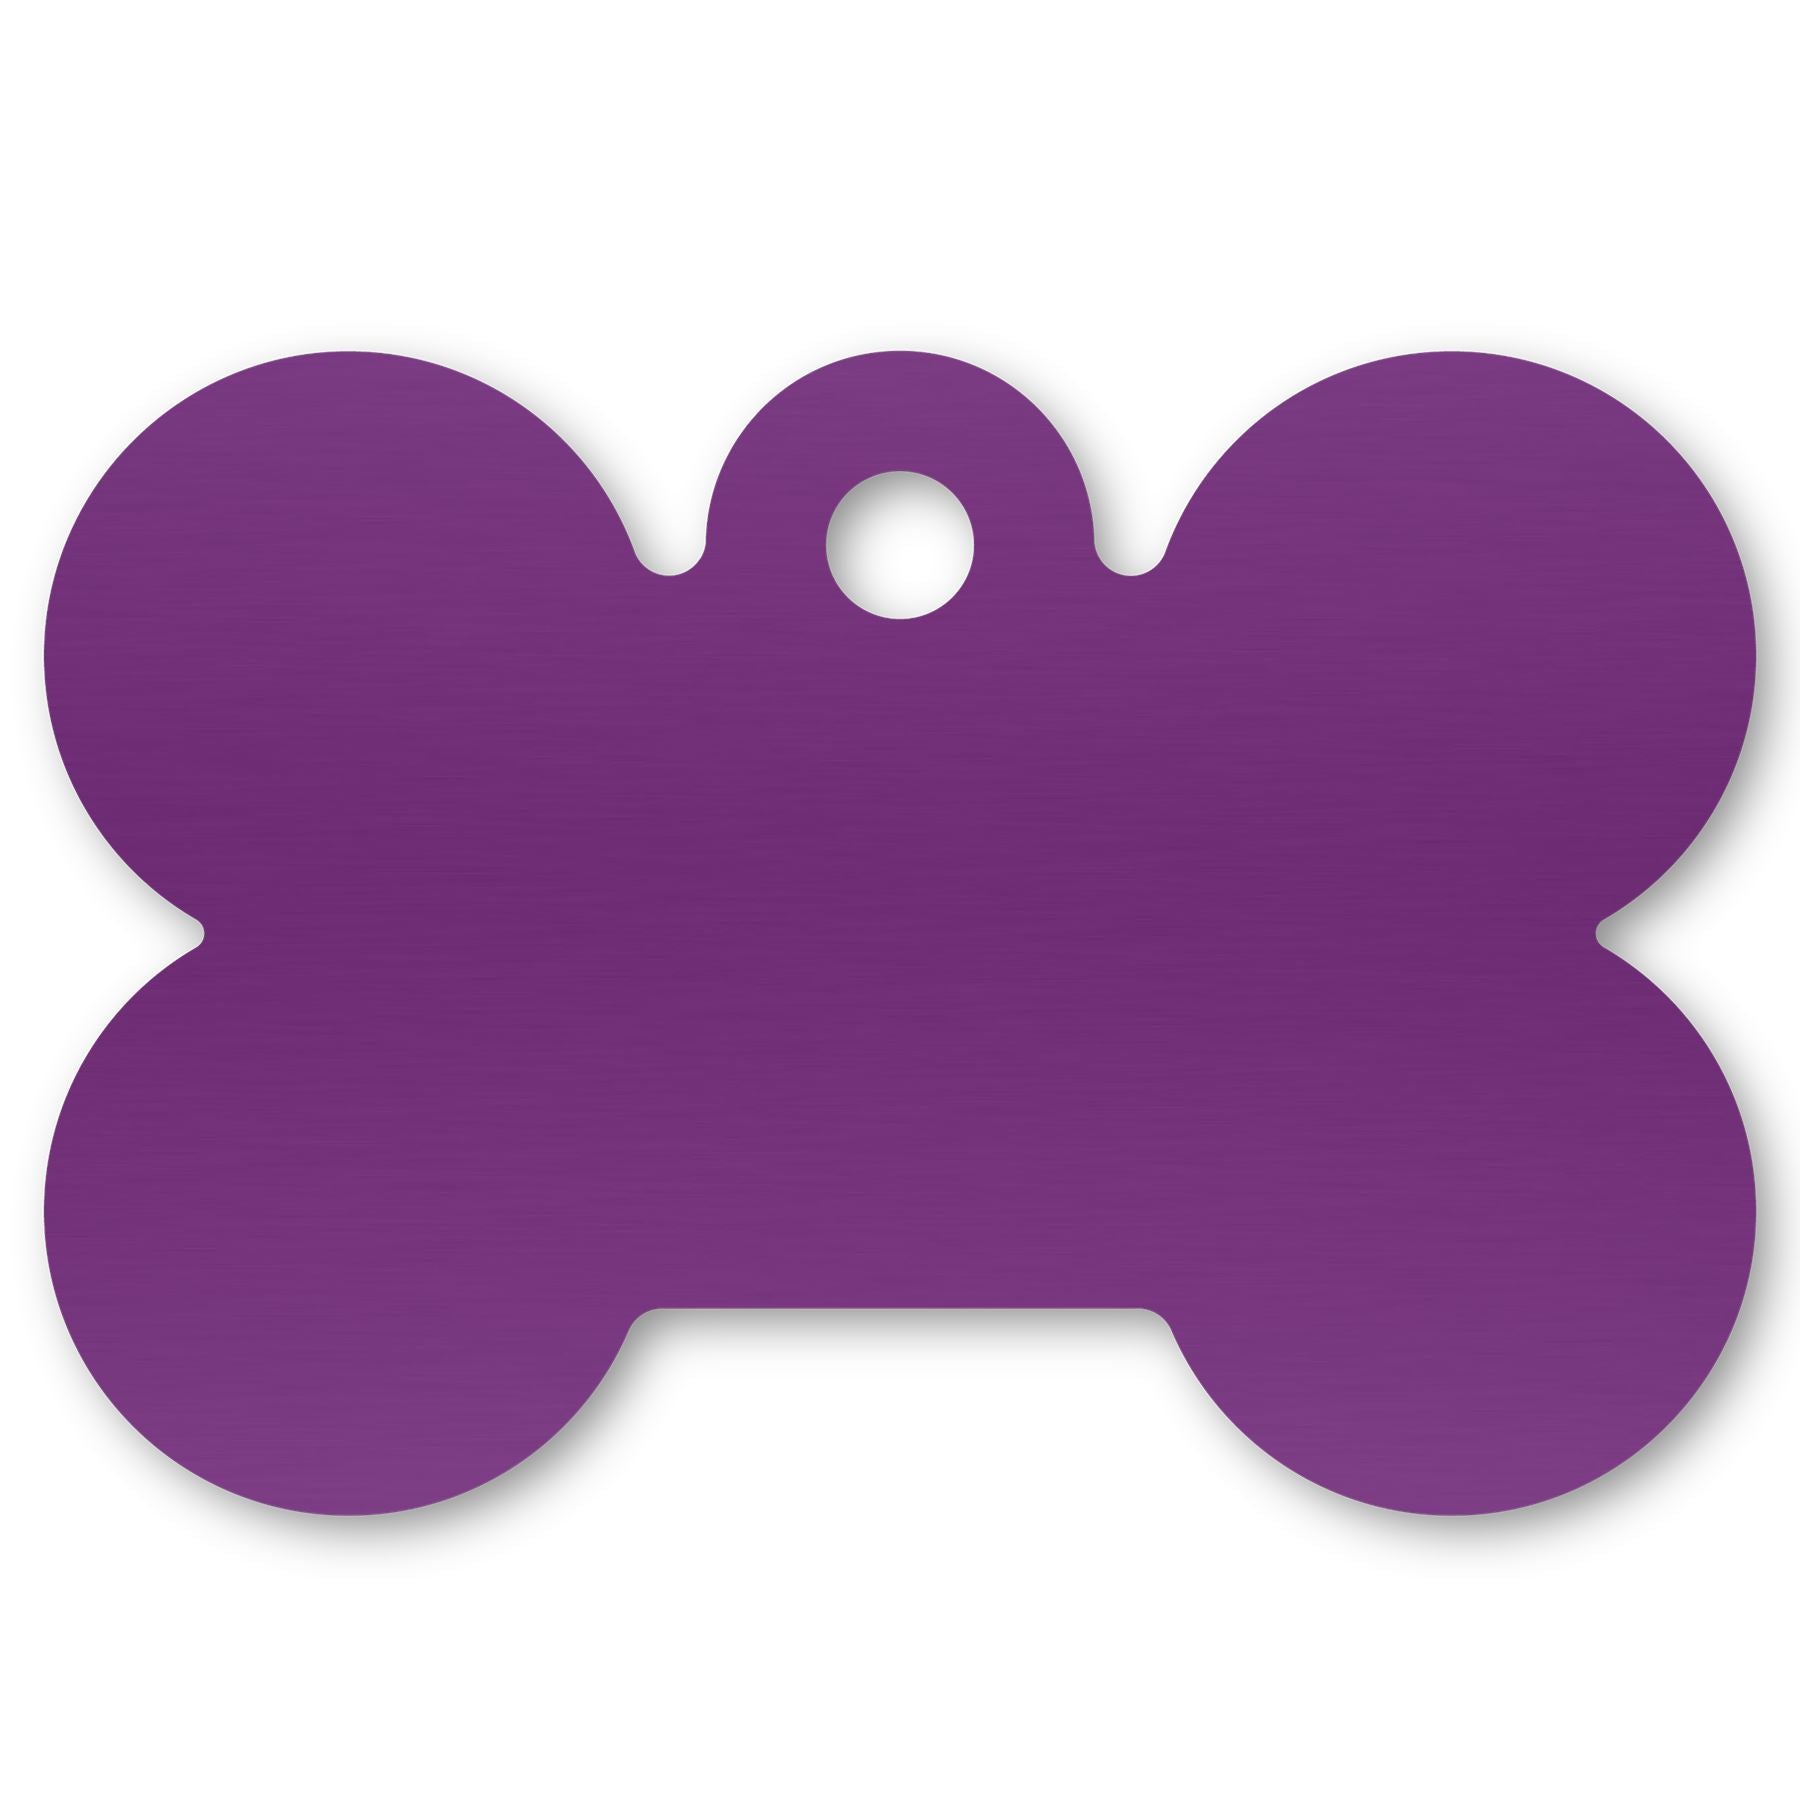 Anodized Aluminum Dog Bone Shaped Tags, 1-3/8" x 2-1/16" with 1/8" Hole, Laser Engraved Metal Tags Craftworks NW Purple 